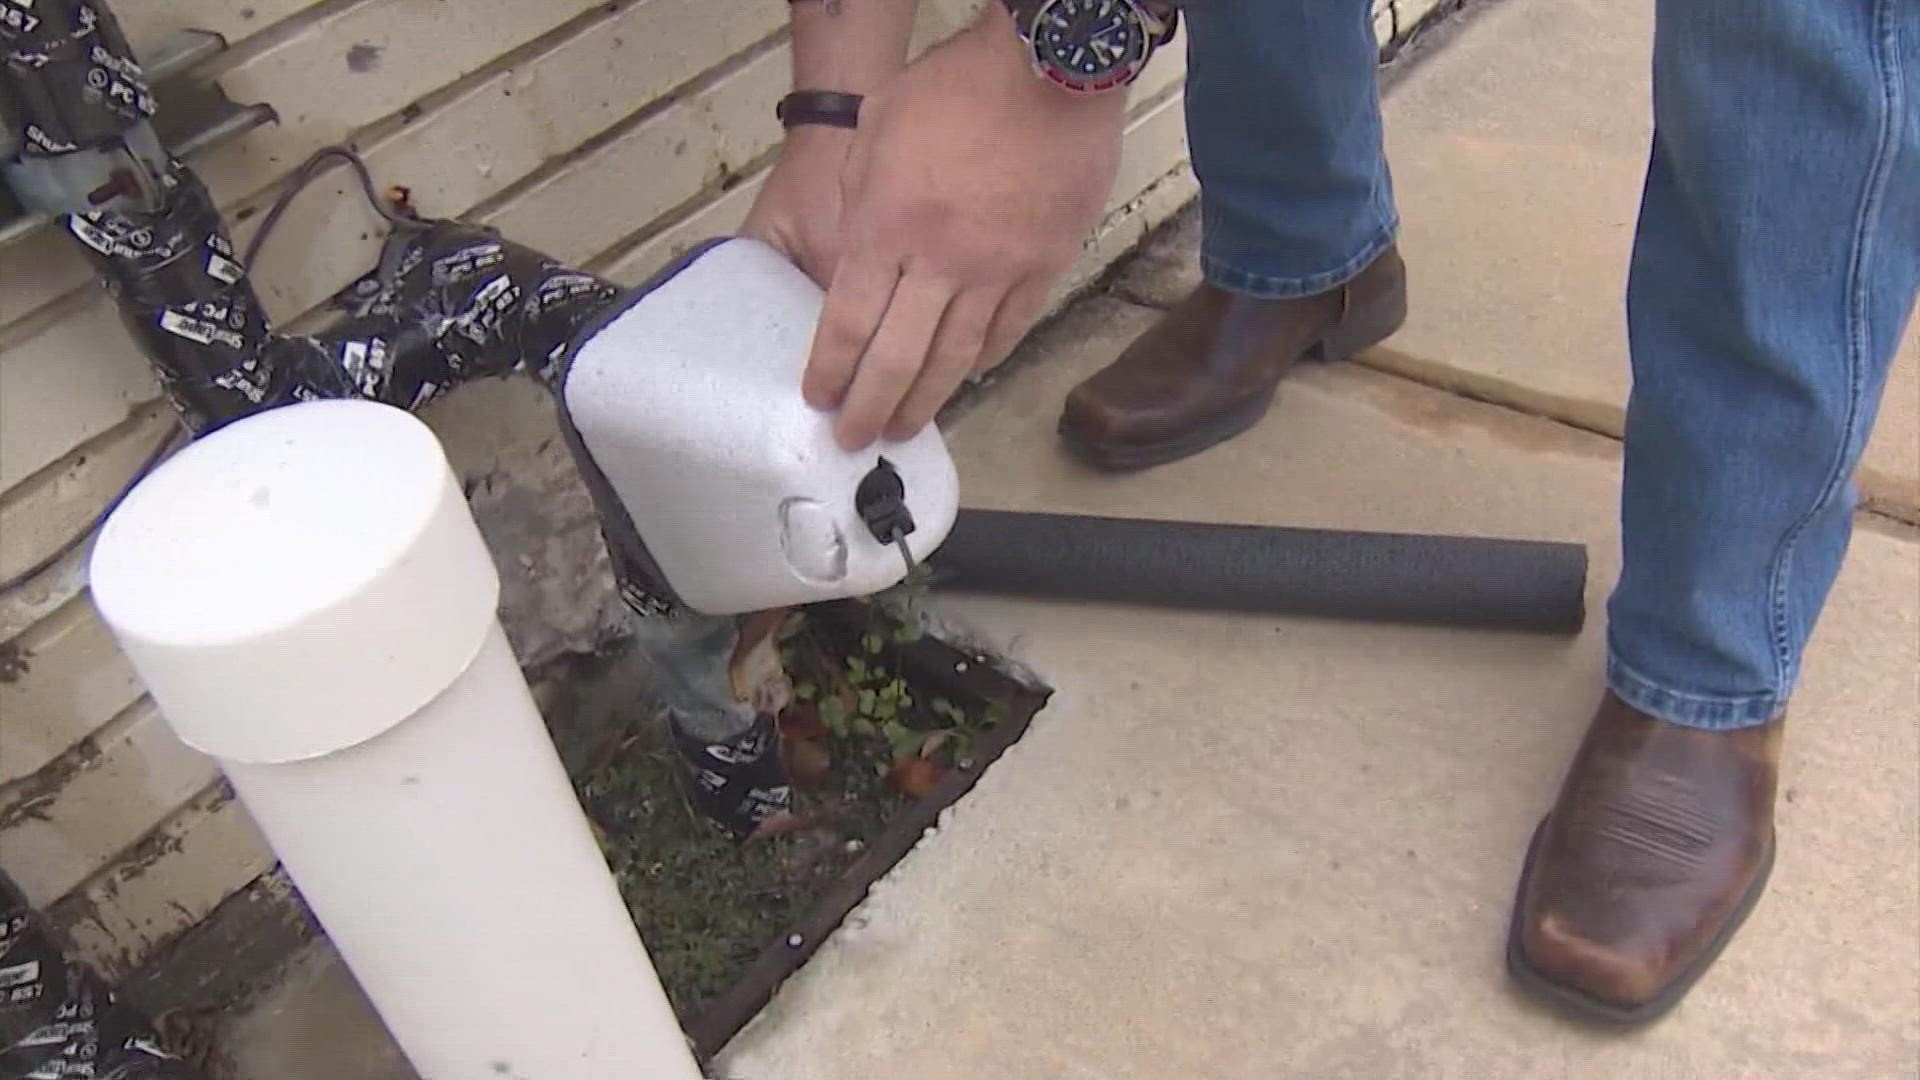 Plumbing technicians said the worst mistake you can make during a cold snap is to do nothing. They recommend covering your outside pipes so they won't burst.